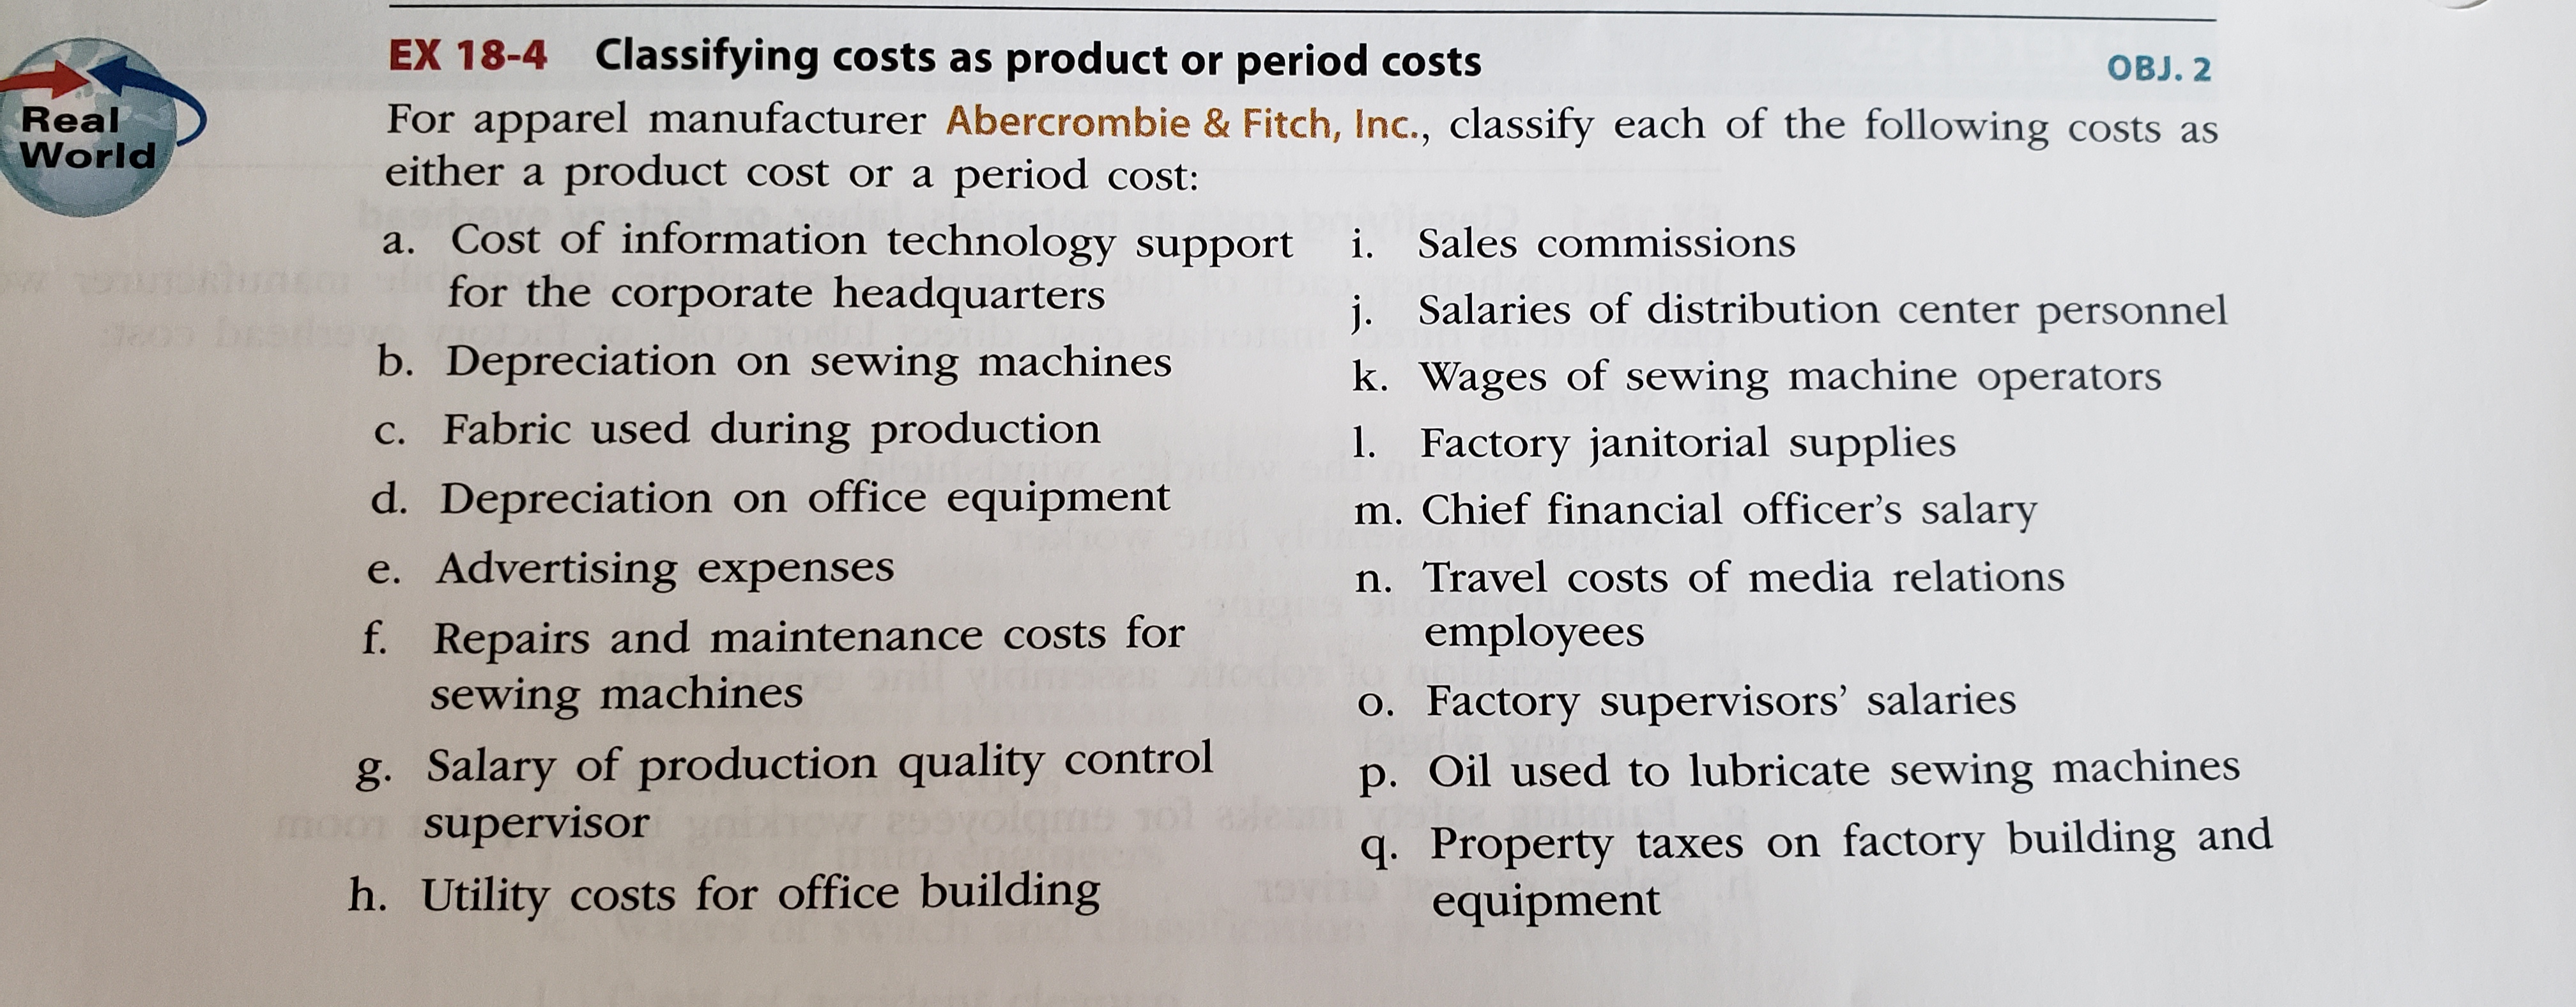 EX 18-4 Classifying costs as product or period costs
For apparel manufacturer Abercrombie & Fitch, Inc., classify each of the following costs as
either a product cost or a period cost:
OBJ. 2
Real
World
a. Cost of information technology support
for the corporate headquarters
i. Sales commissions
j. Salaries of distribution center personnel
b. Depreciation on sewing machines
c. Fabric used during production
k. Wages of sewing machine operators
1. Factory janitorial supplies
m. Chief financial officer's salary
d. Depreciation on office equipment
e. Advertising expenses
n. Travel costs of media relations
f. Repairs and maintenance costs for
sewing machines
employees
o. Factory supervisors' salaries
g. Salary of production quality control
mom supervisor
p. Oil used to lubricate sewing machines
q. Property taxes on factory building and
equipment
h. Utility costs for office building
